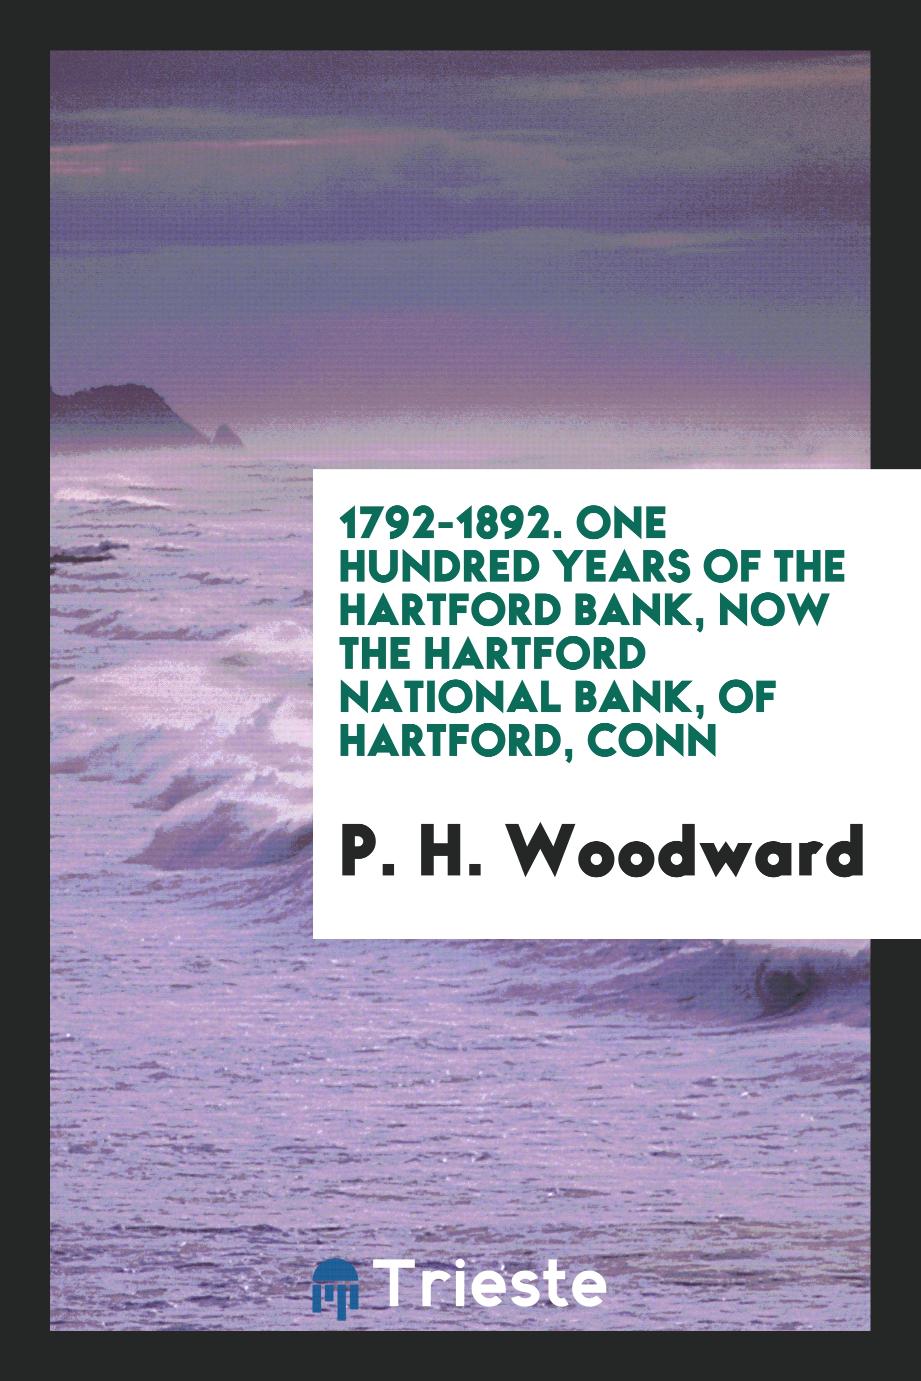 1792-1892. One hundred years of the Hartford bank, now the Hartford National bank, of Hartford, Conn